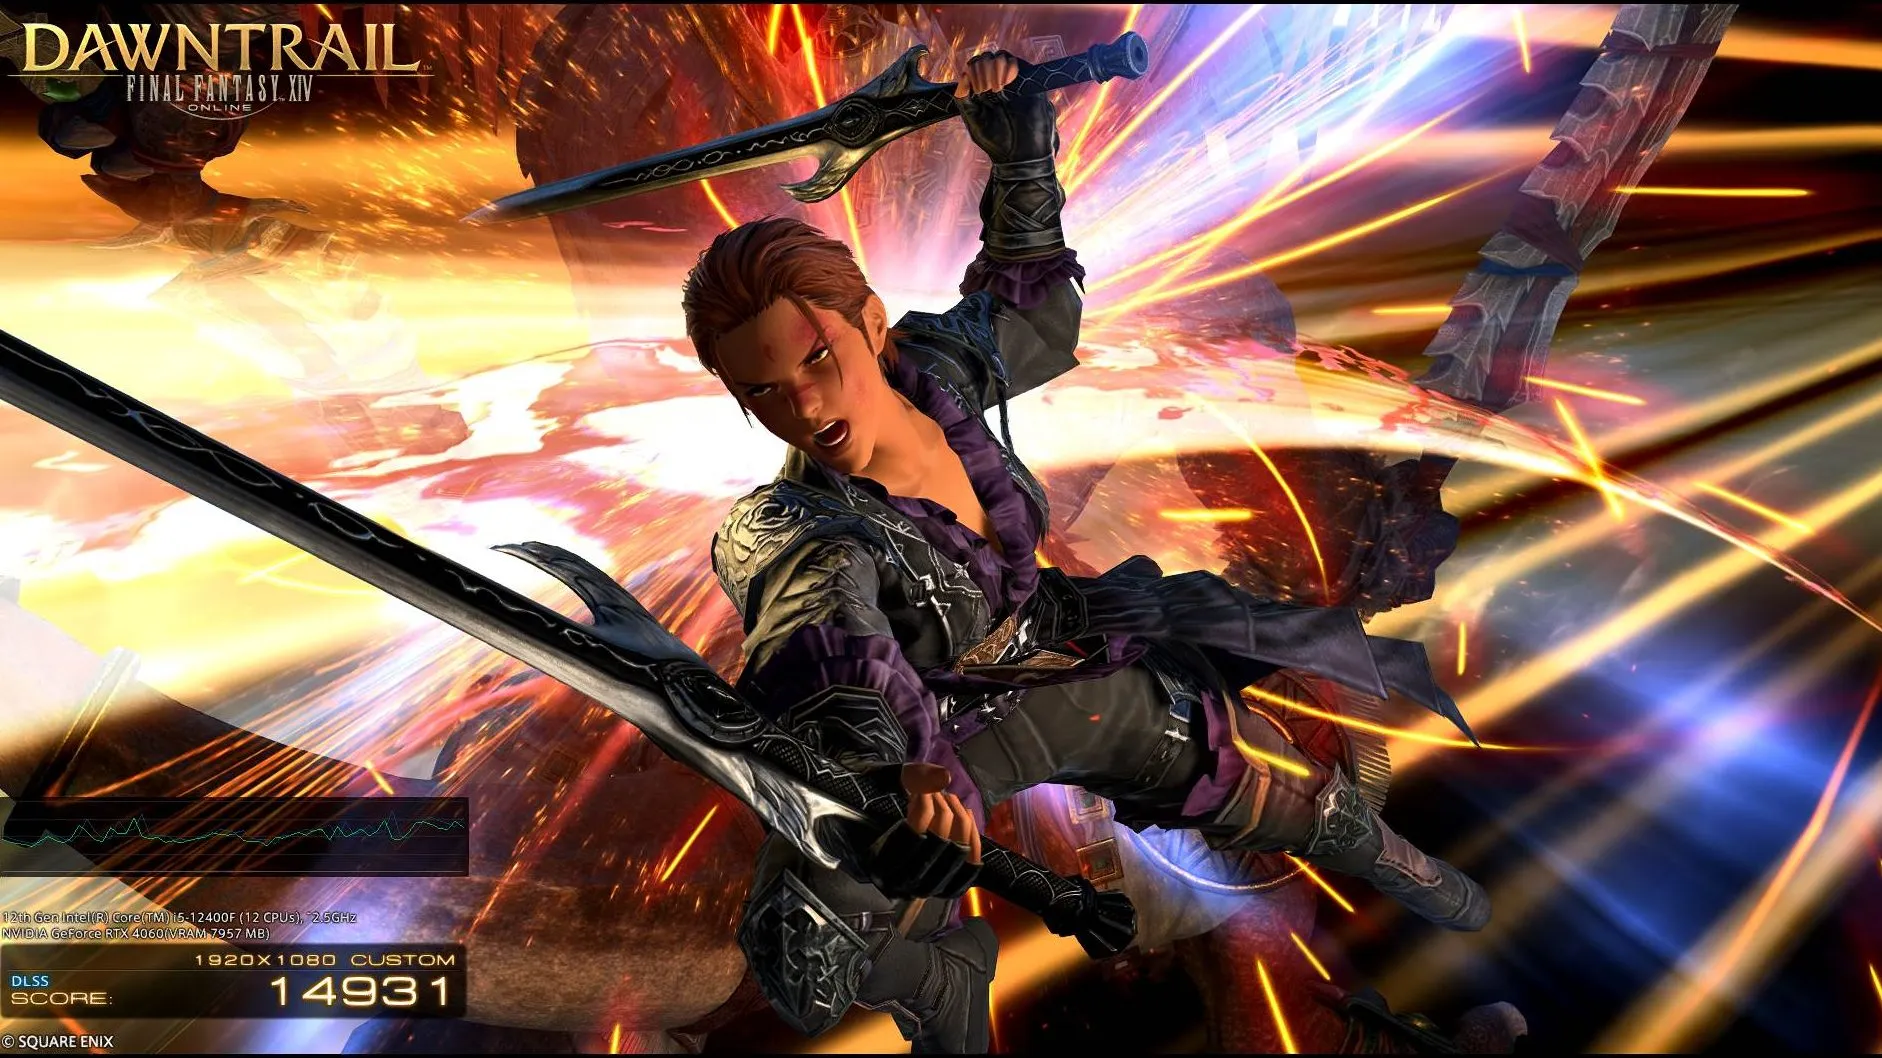 A Final Fantasy character surrounded by sparks swings dual swords.